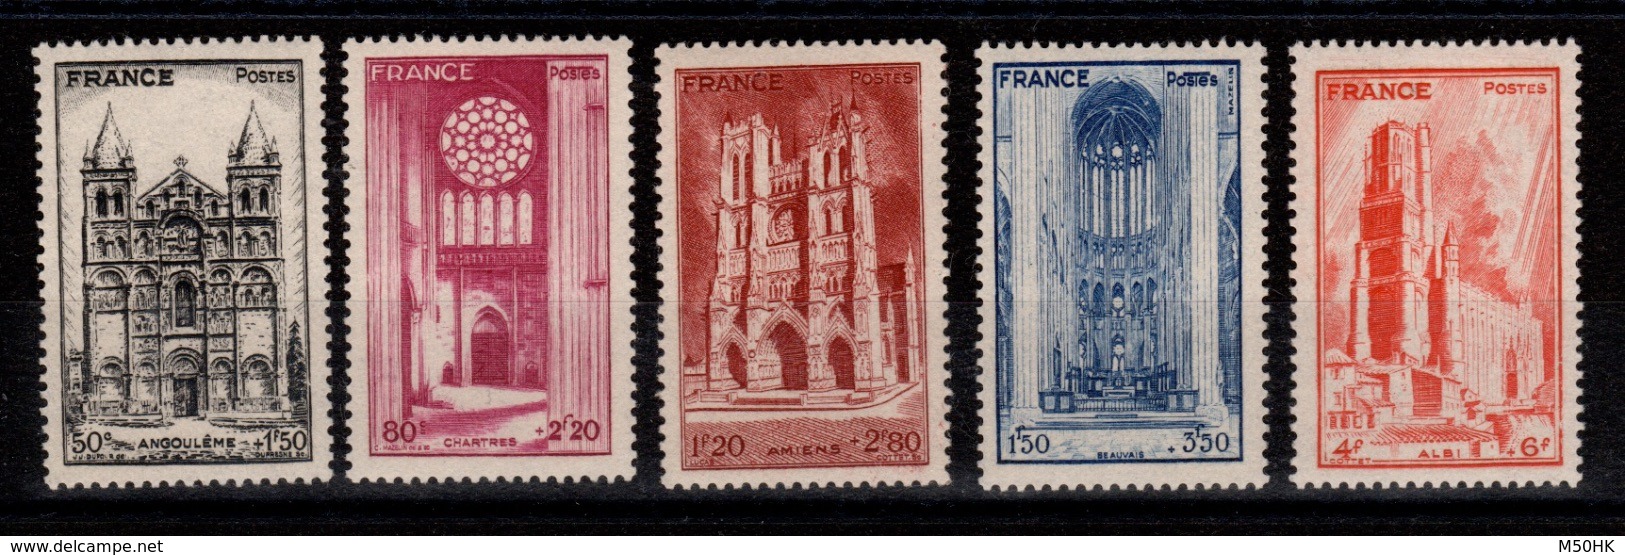 Cathedrales YV 663 à 667 N* (infime Trace) Cote 3,50 Euros - Unused Stamps